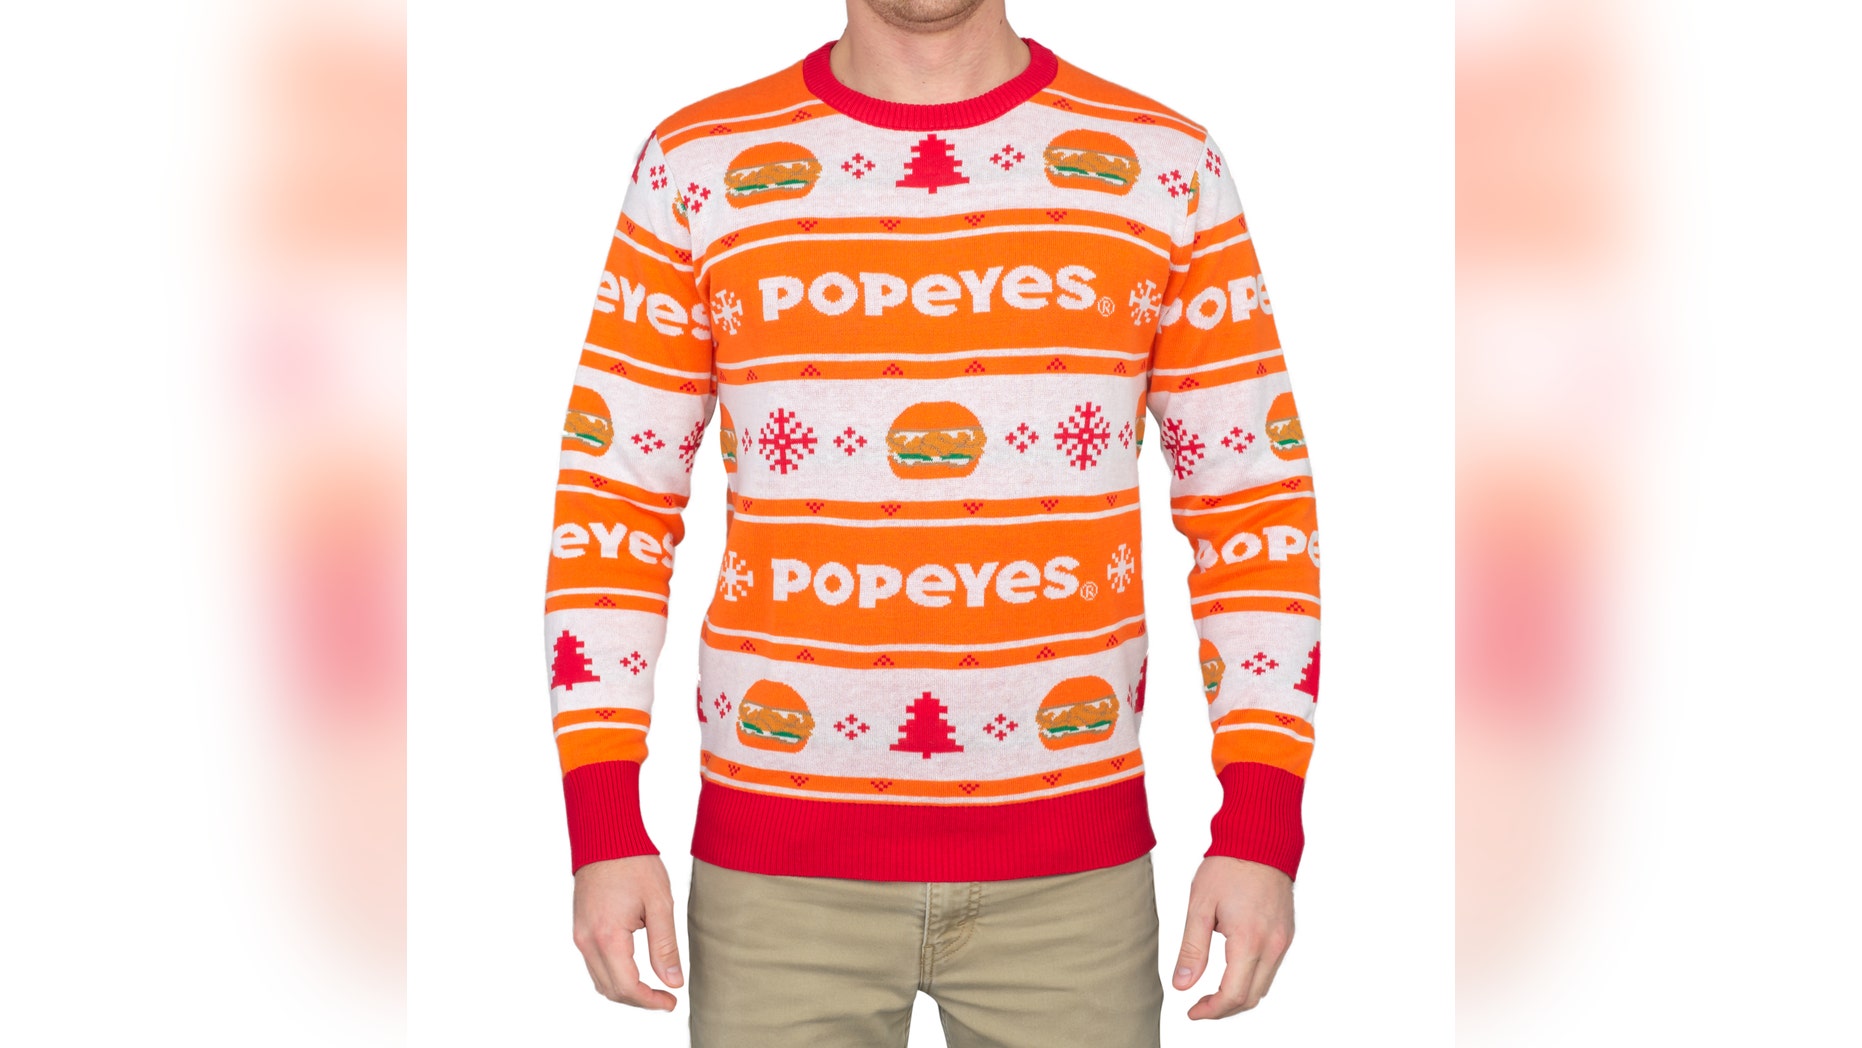 The sweater is available starting today, while supplies last.